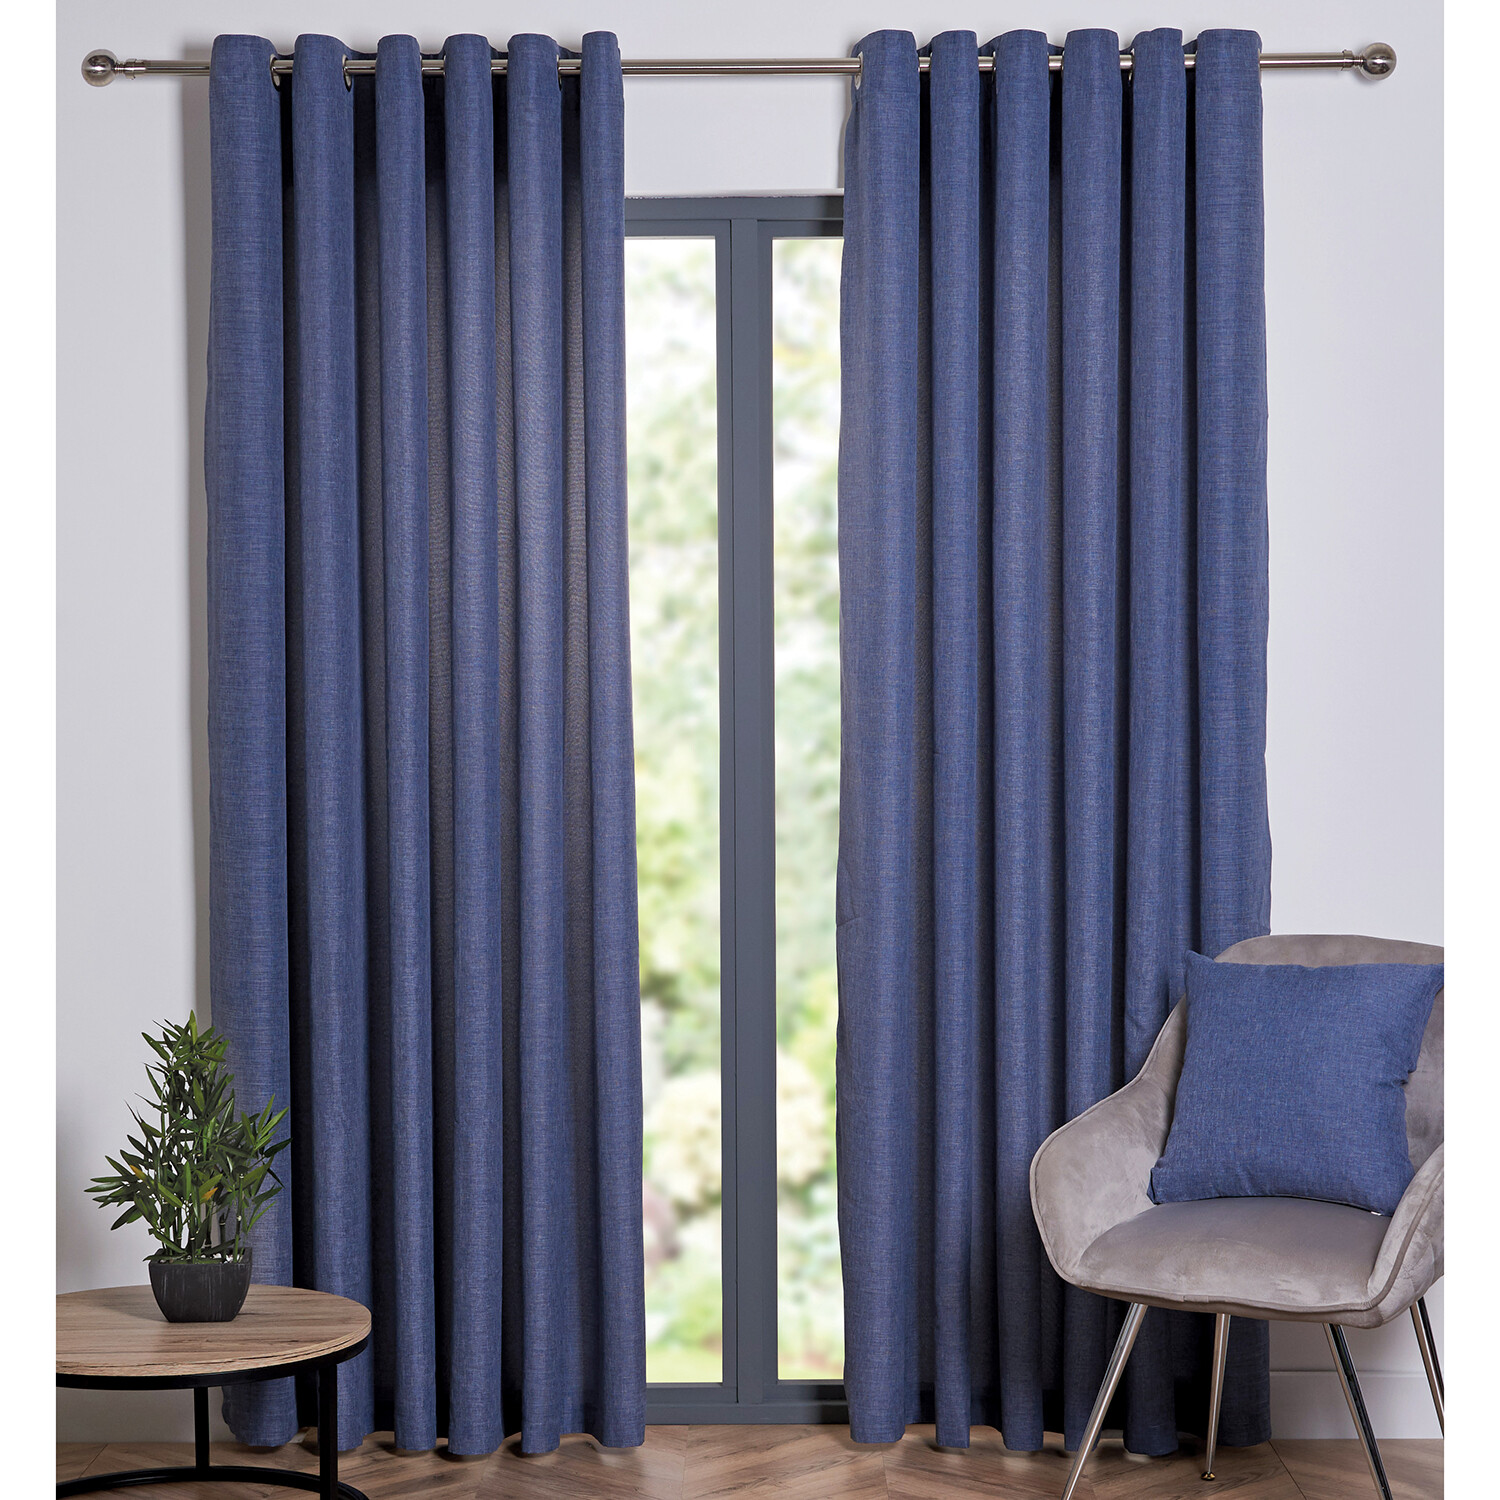 My Home Taylor Navy Eyelet Curtains 168 x 137cm Image 1